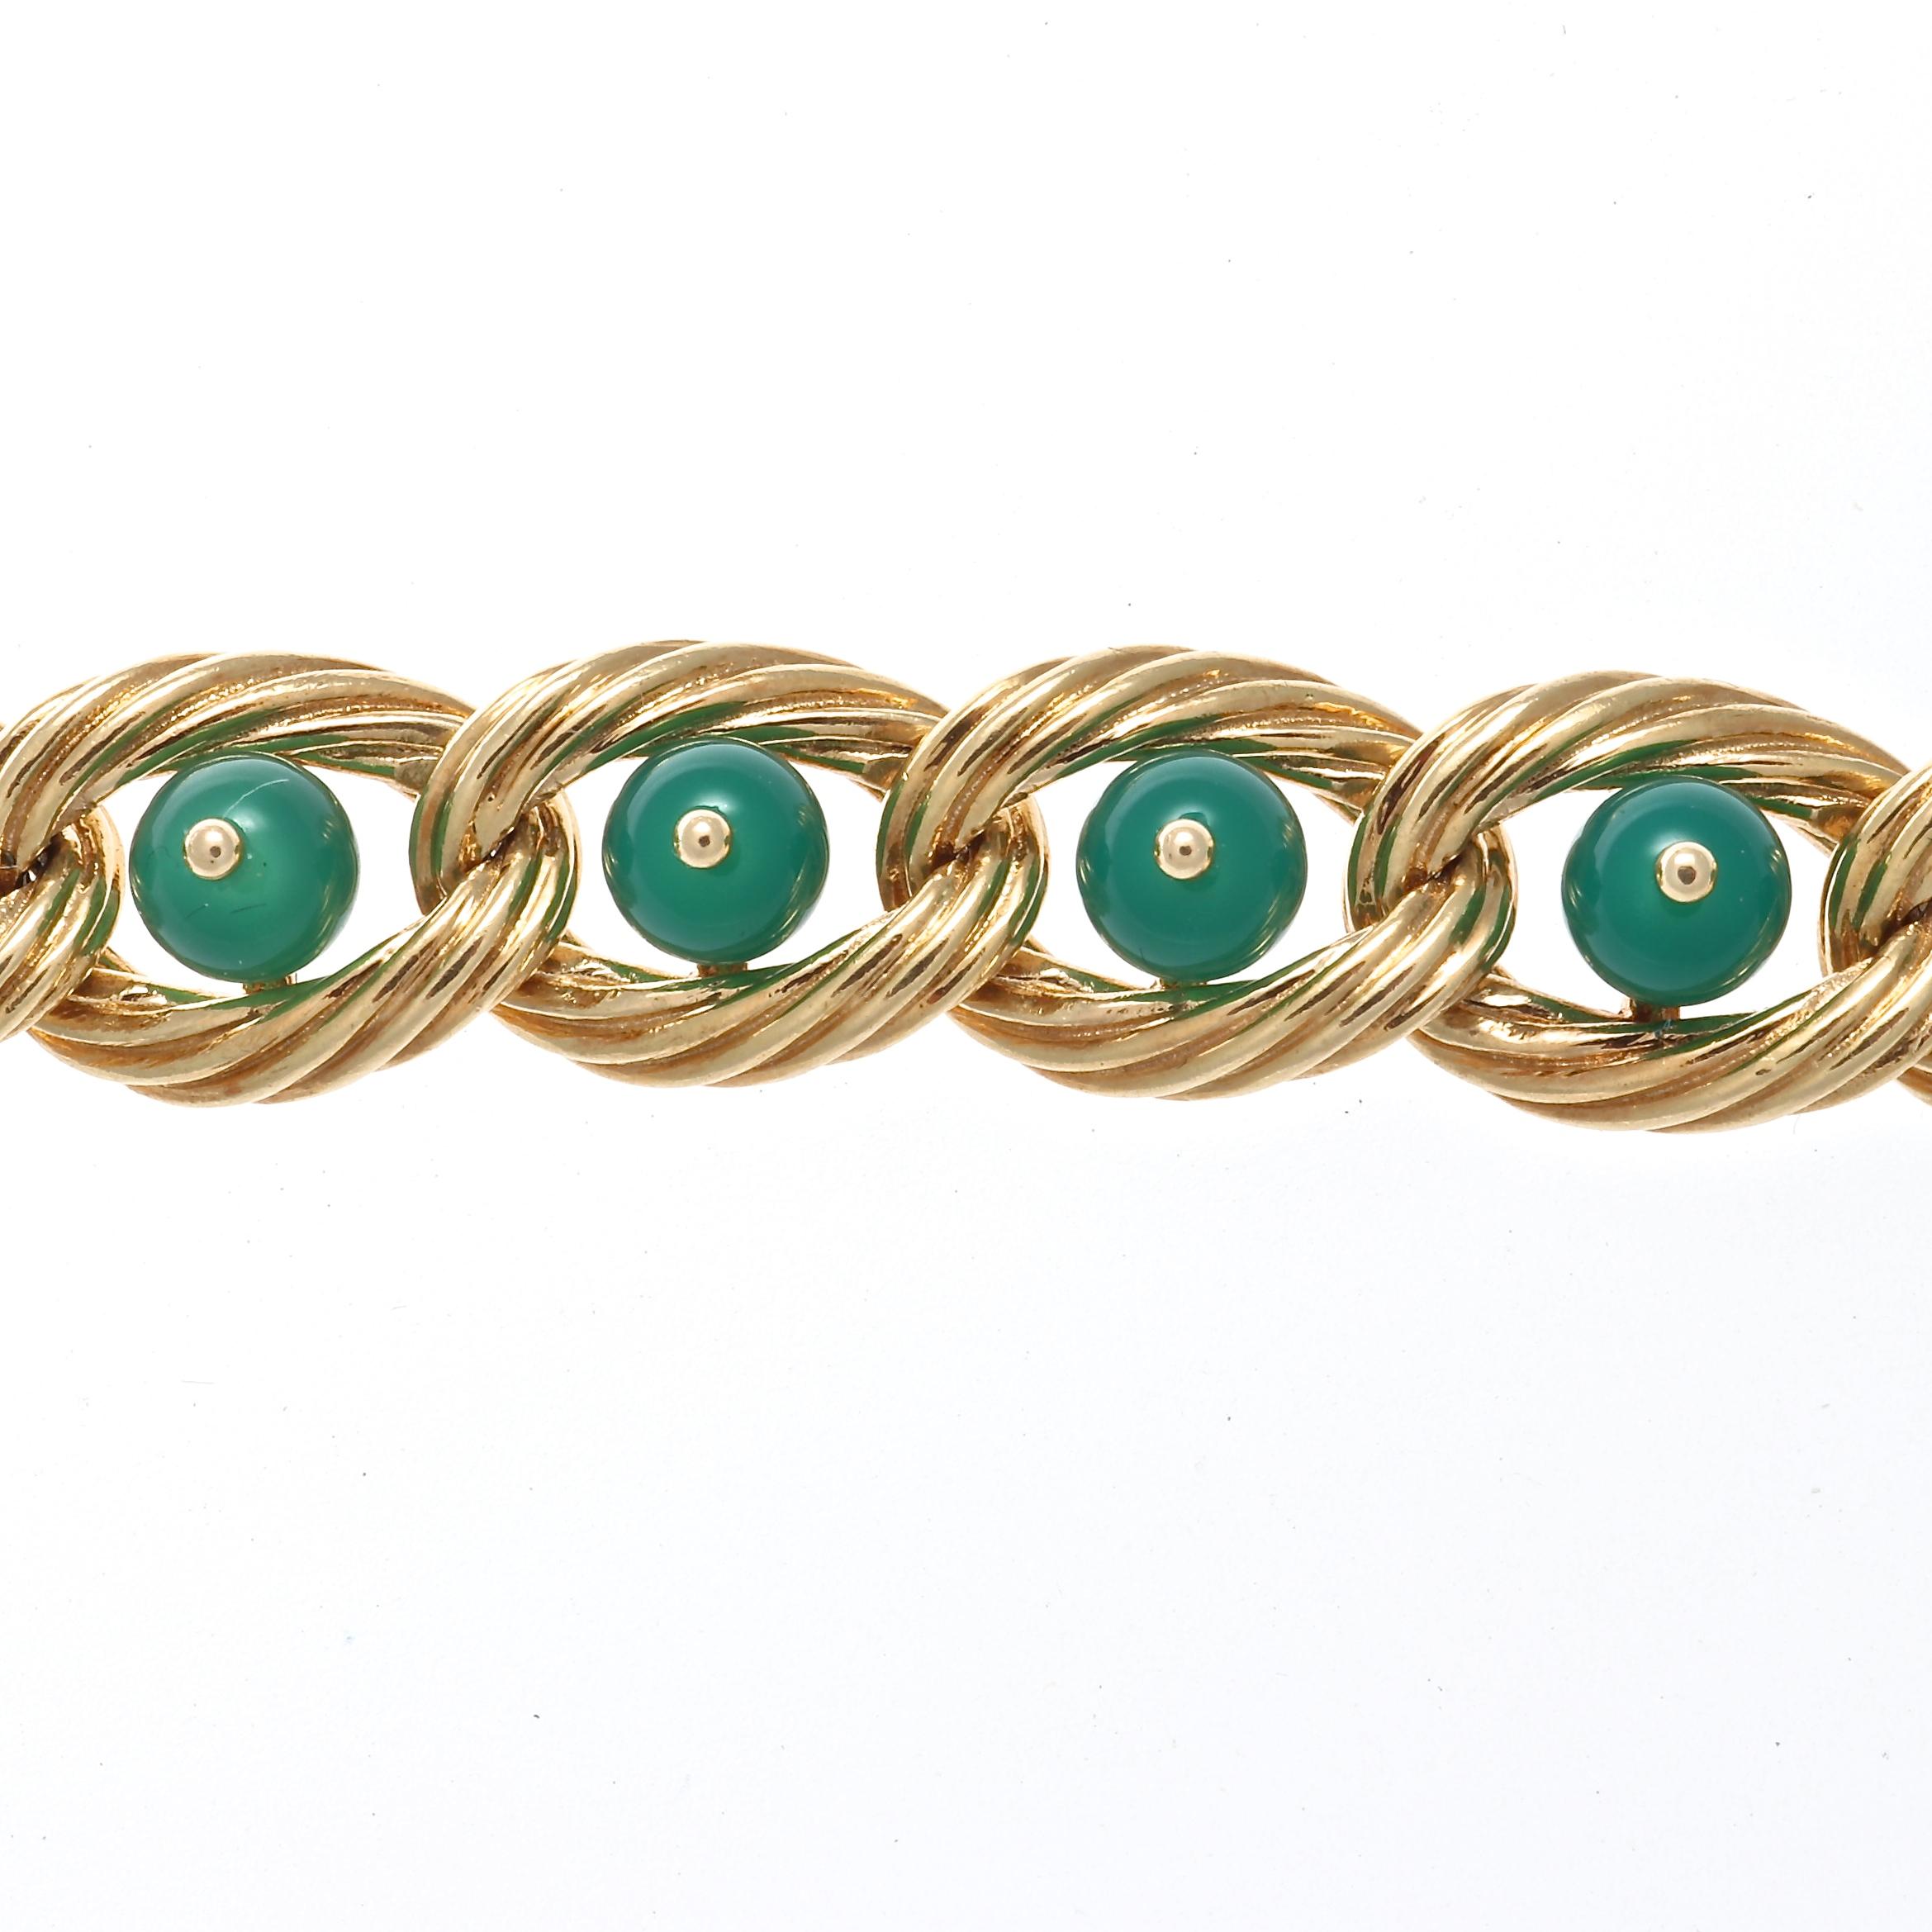 Iconic vintage creation from  Van Cleef & Arpels. Featuring etched gold wrapping seamlessly around the forest green chrysoprase. Signed Van Cleef & Arpels, numbered and stamped with French hallmarks. Please contact us if you are interested in buying